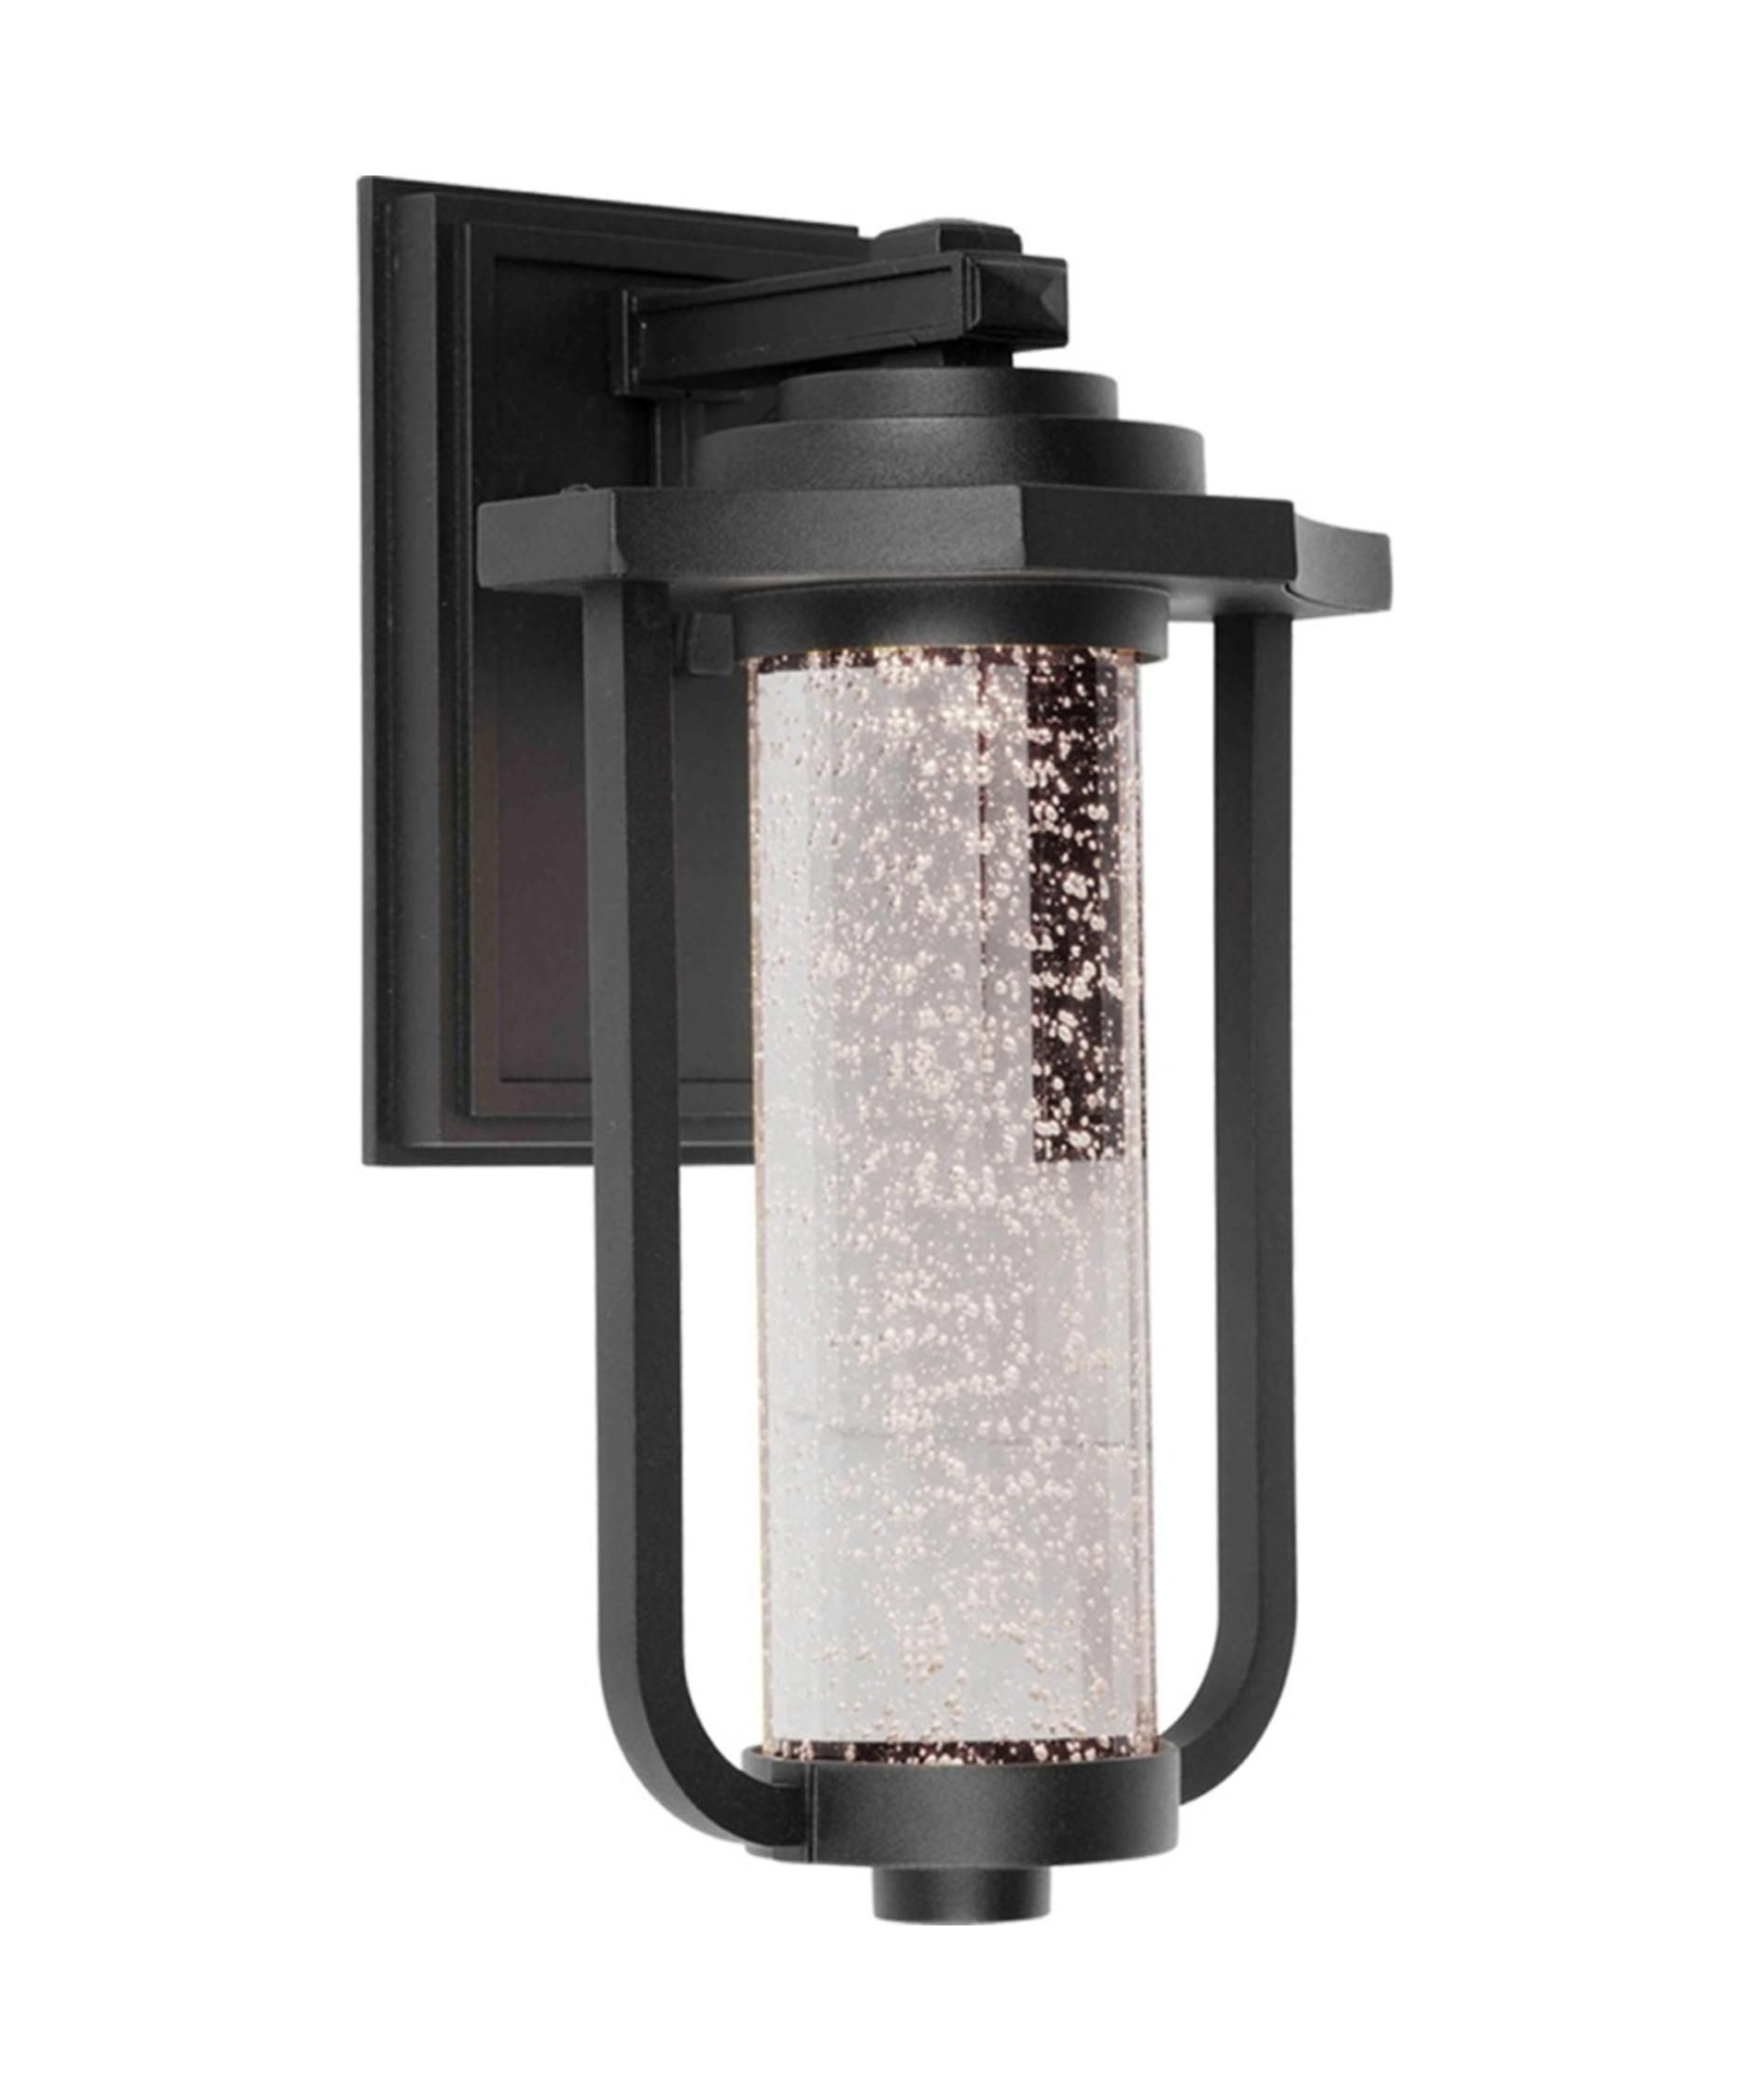 Artcraft Ac9011 North Star 6 Inch Wide 1 Light Outdoor Wall Light With Outdoor Wall Sconce Led Lights (View 15 of 15)